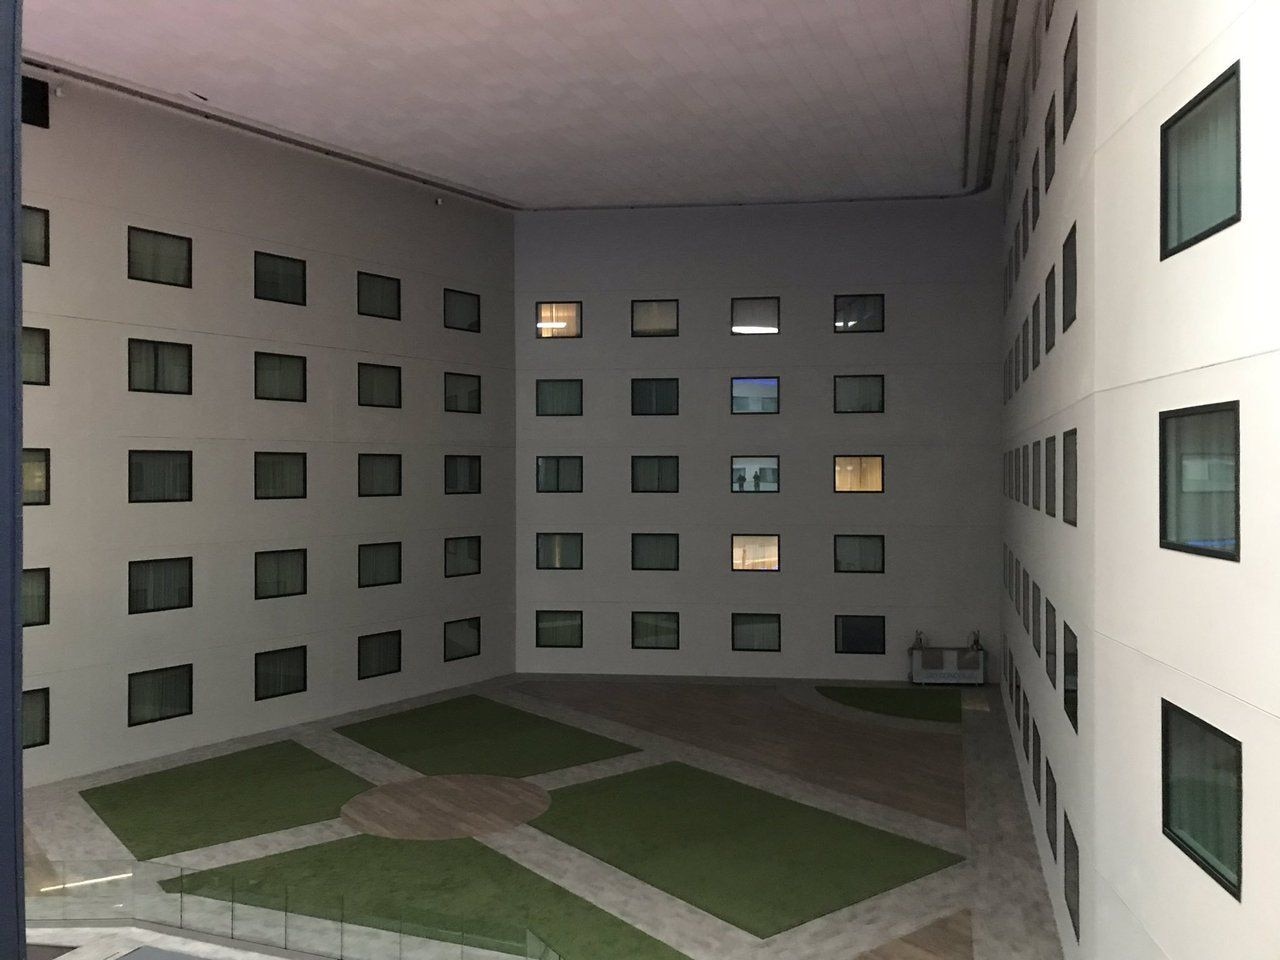 Level 13 The Infinite Apartments [Backrooms Wikidot] 